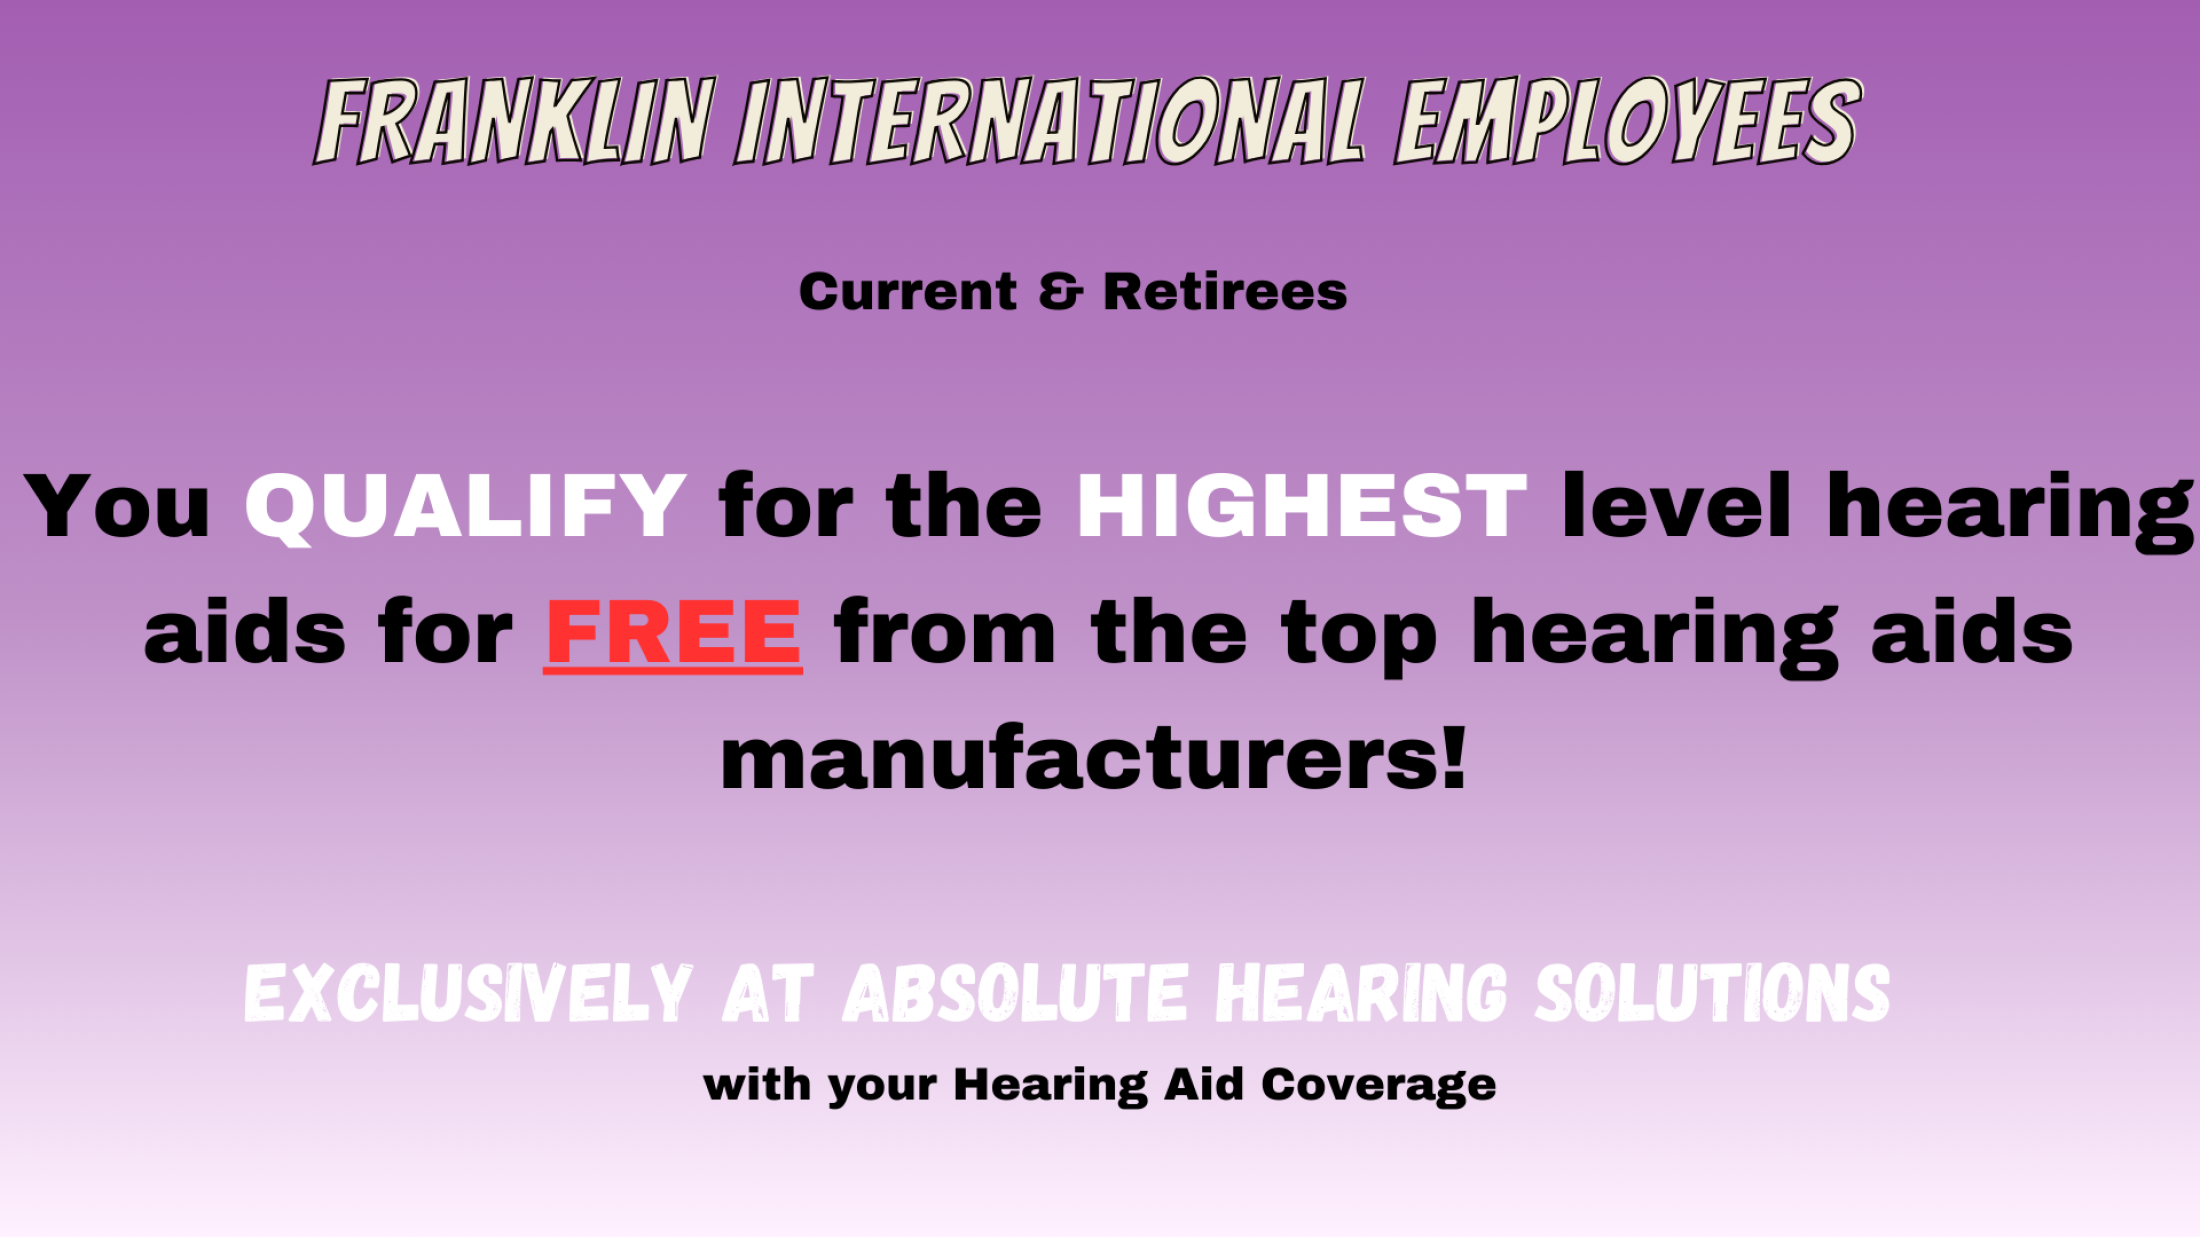 Franklin International Employees Qualify For Free highest level hearing aids with Absolute Hearing Solutions